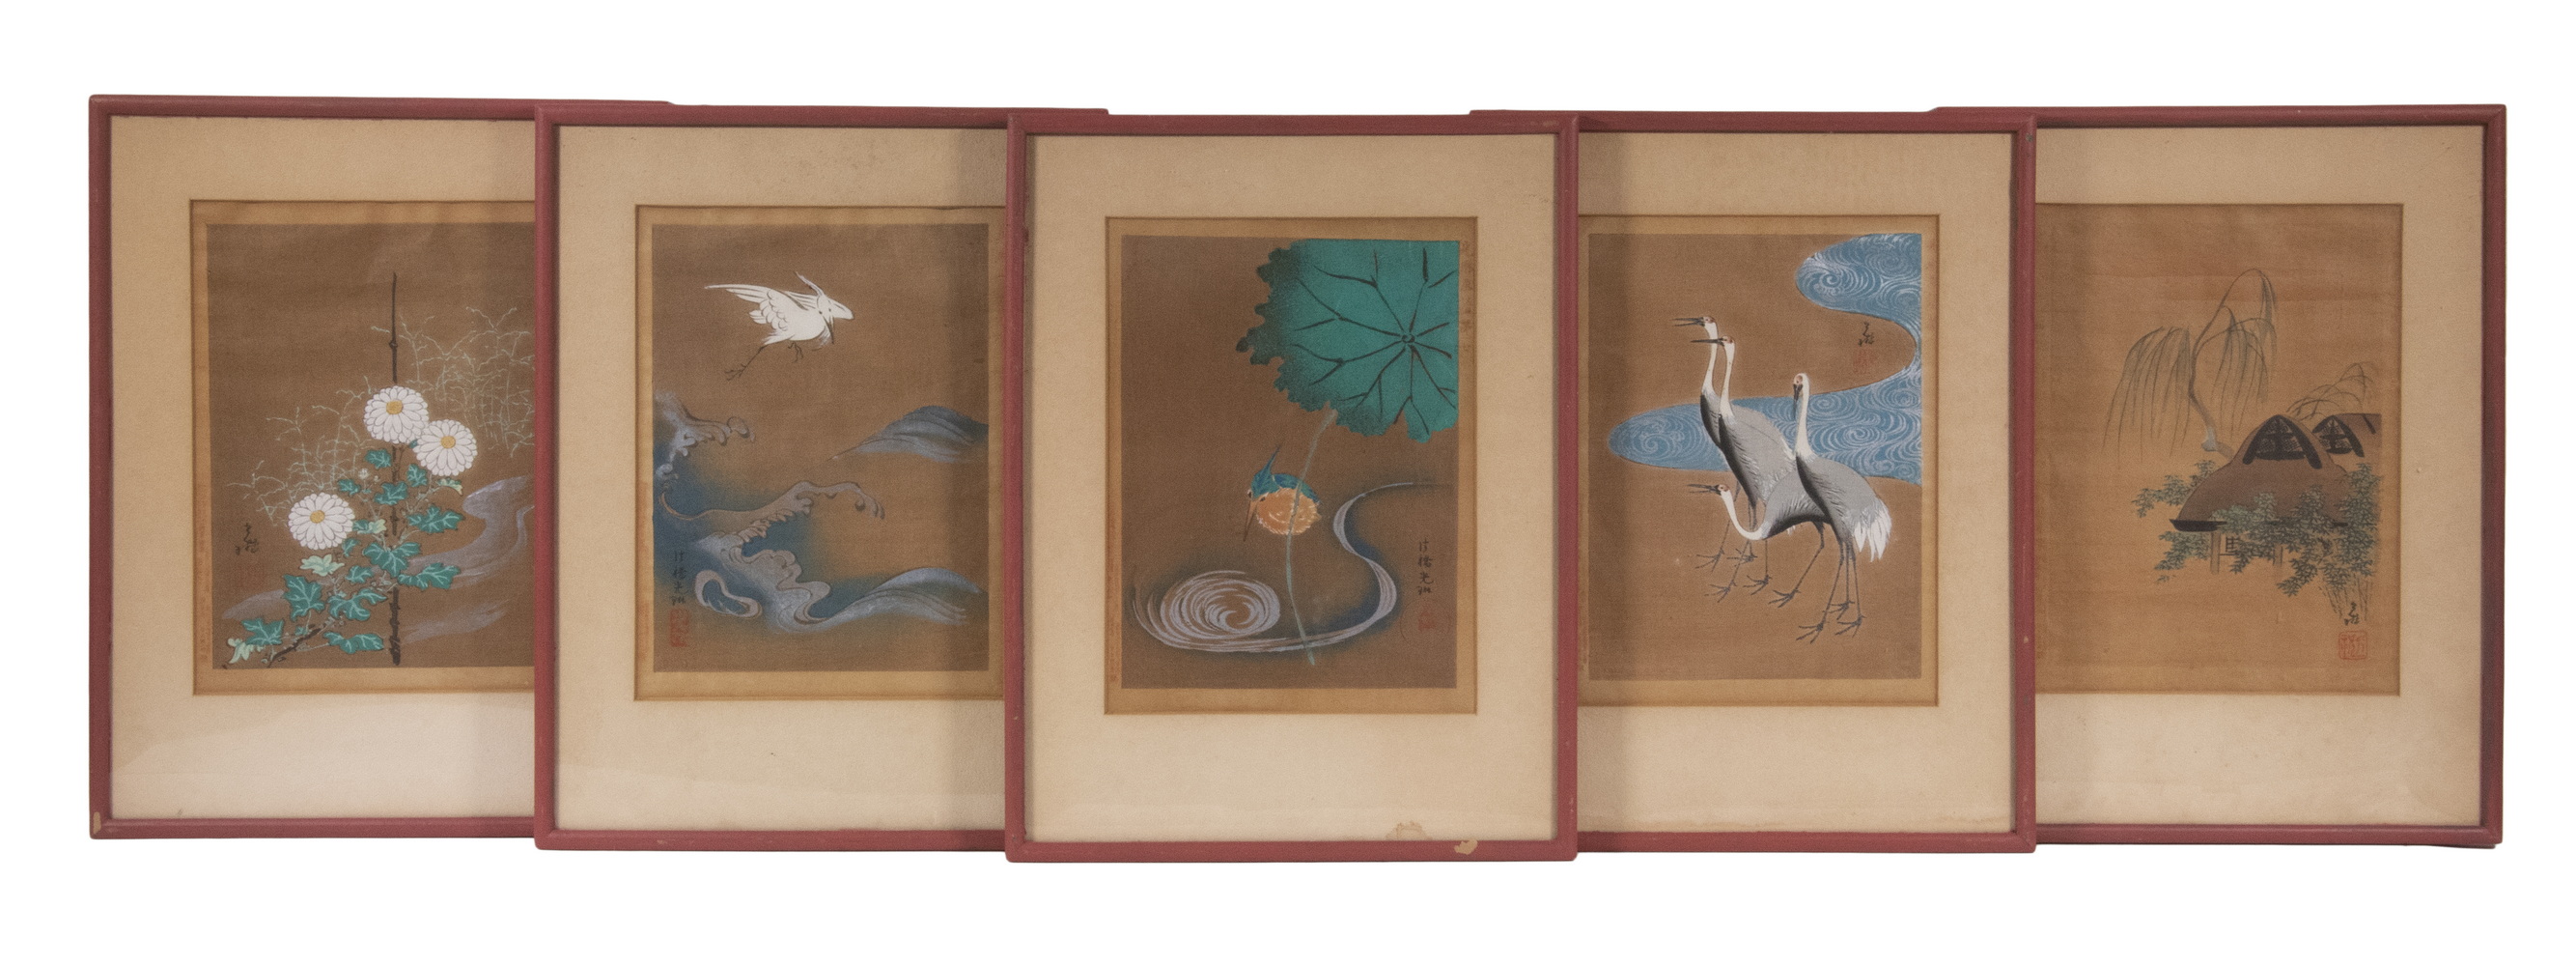  5 JAPANESE WOODBLOCK PRINTS WITH 33d6c6